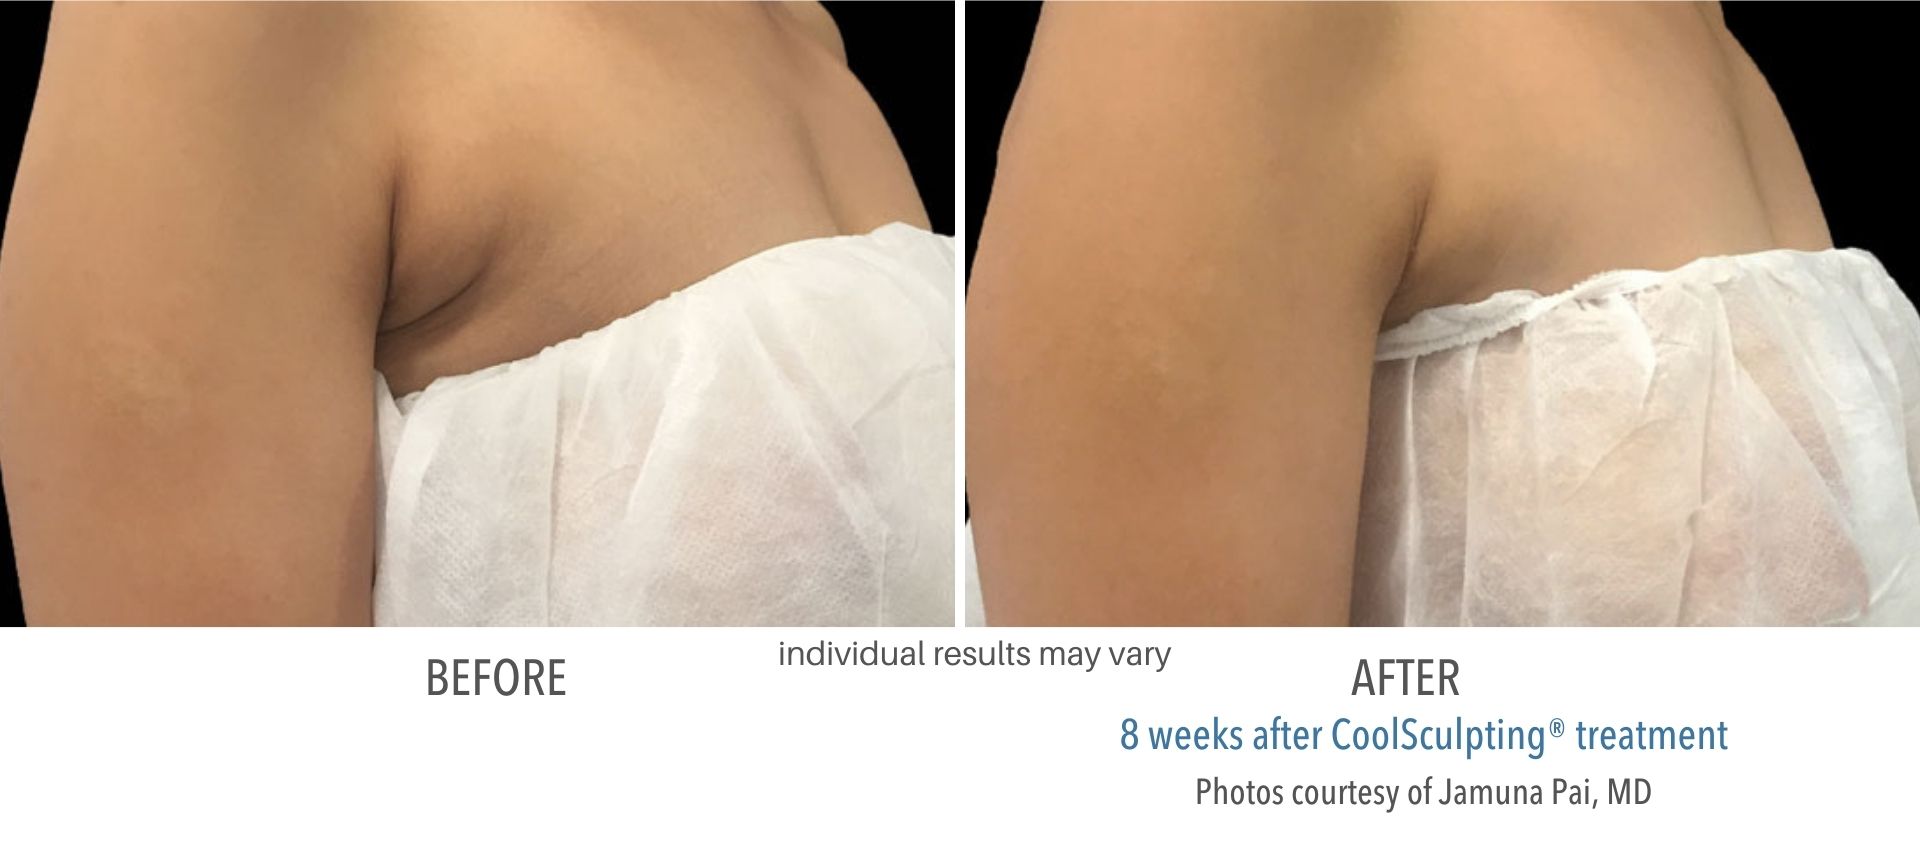 Armpit fat reduction before and after CoolSculpting treatment in Salt Lake City, Utah.